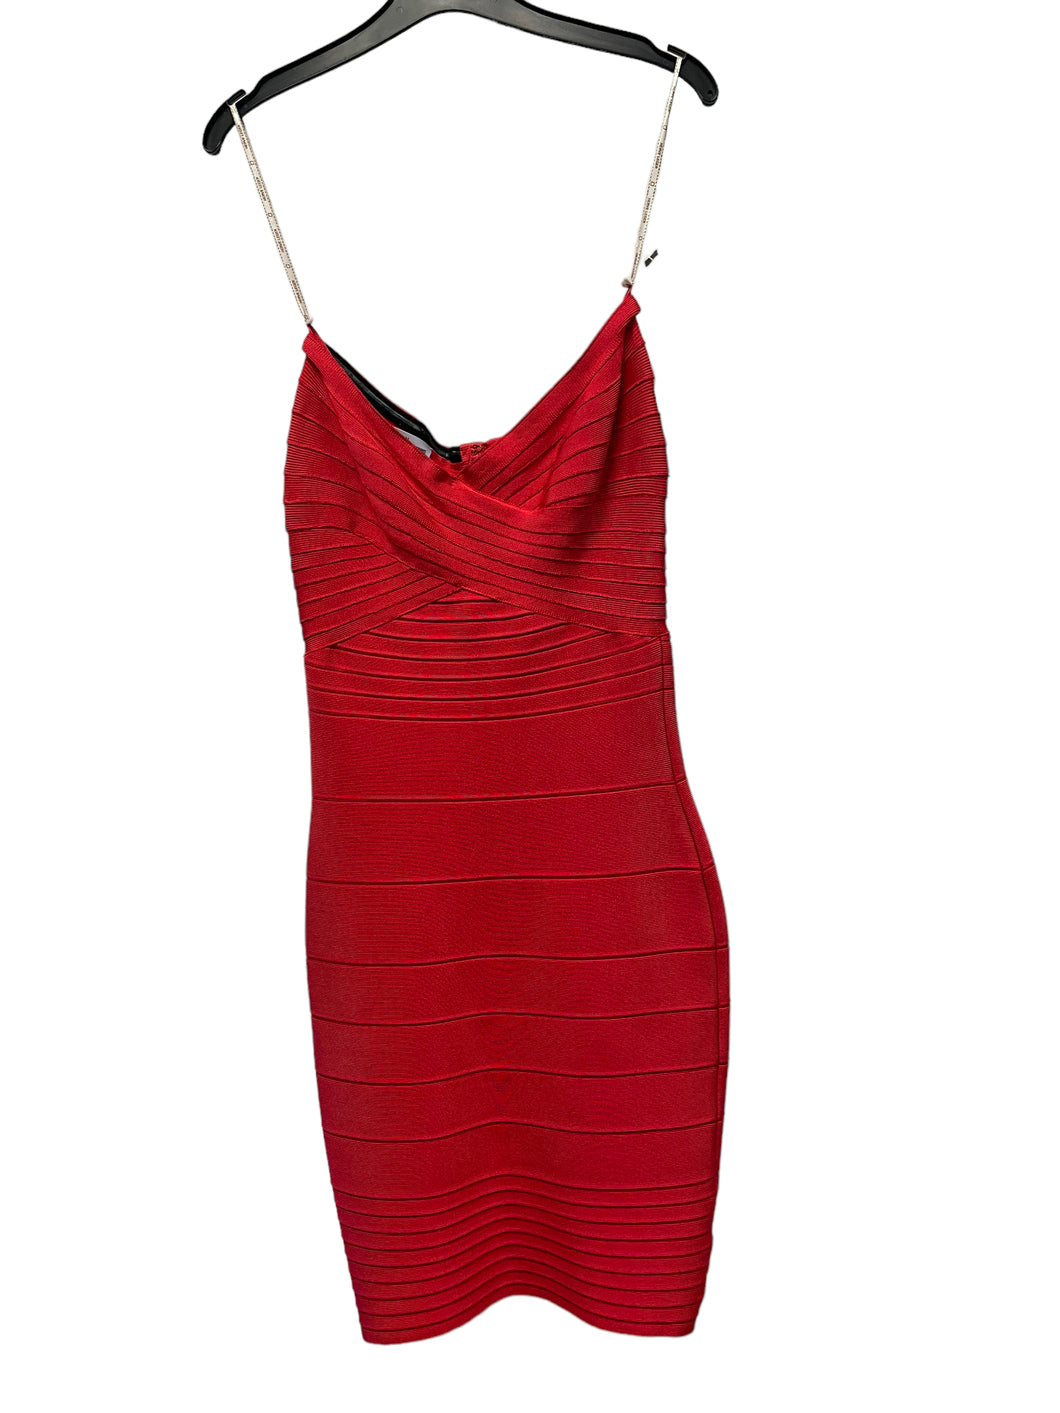 Herve Leger Ladies Strappy Dress Size Small